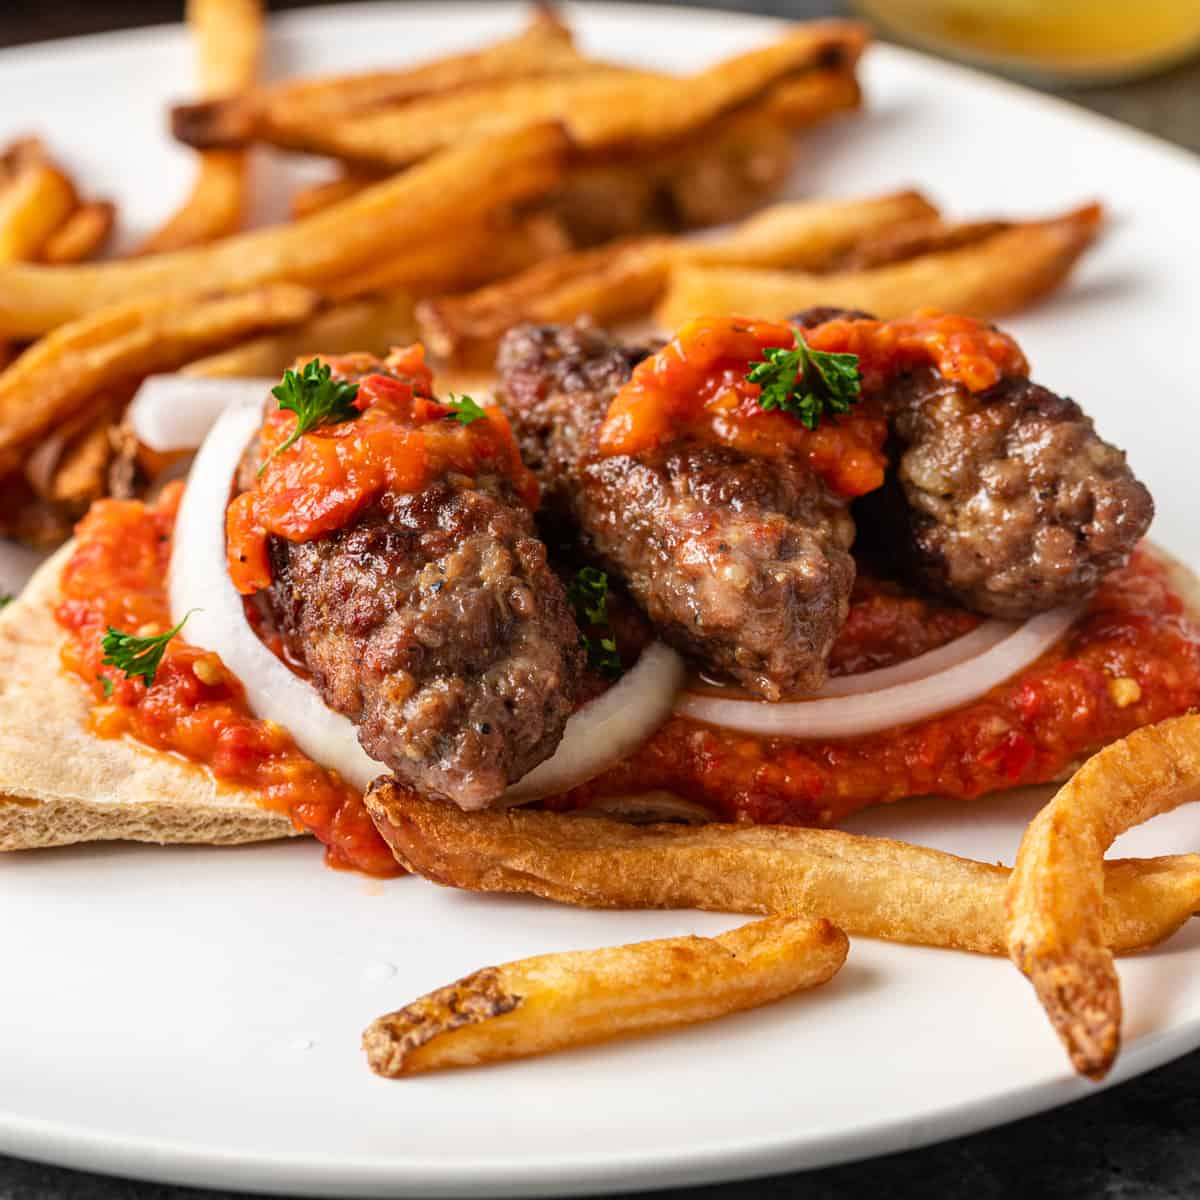 Cevapi Balkan Skinless Sausages on a plate with fries